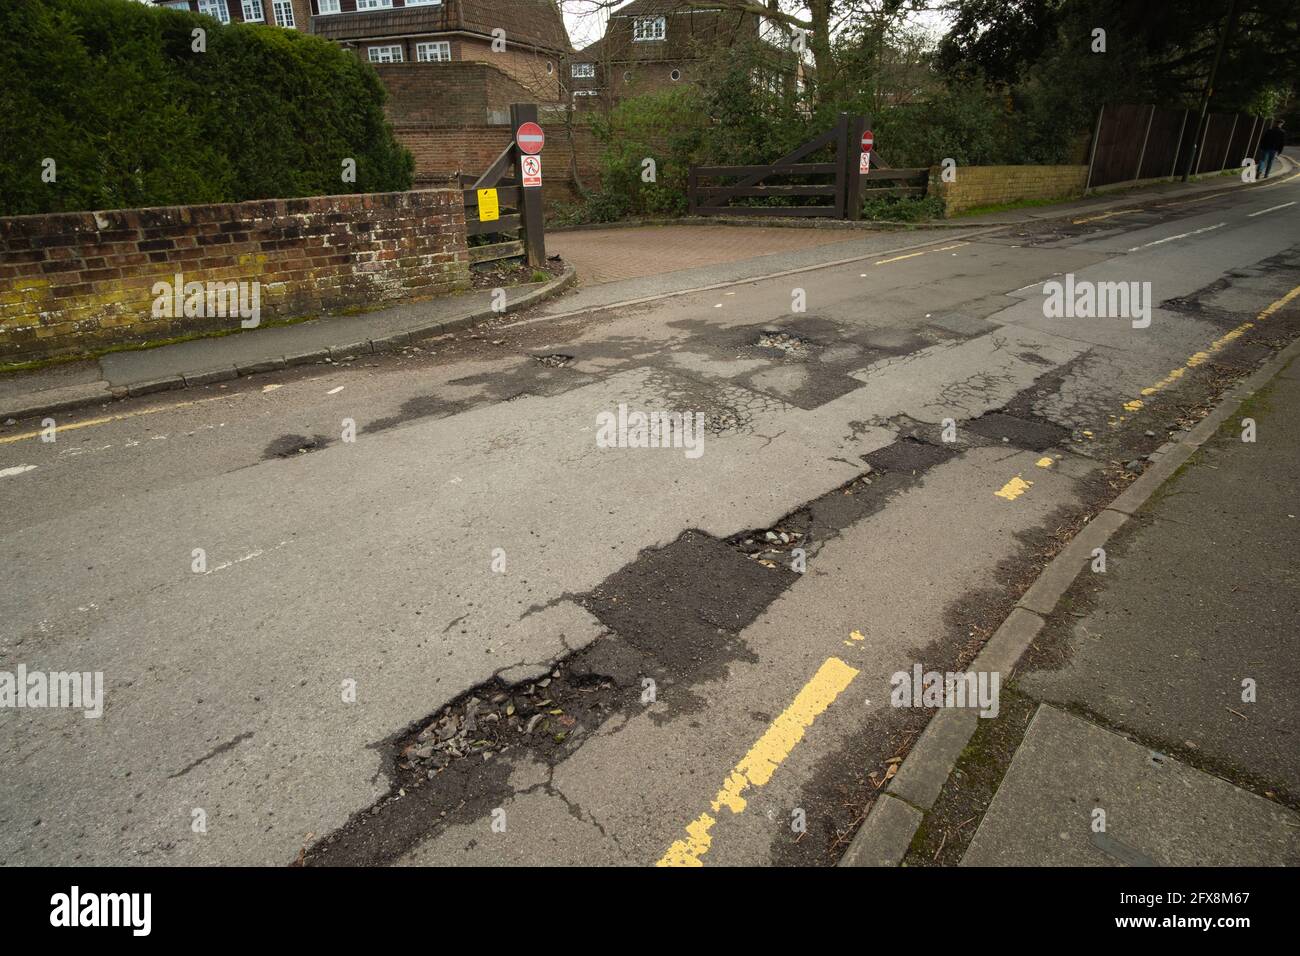 EPSOM, UK - CIRCA MARCH 2020: A road in bad condition with uneven surface and lots of potholes needing repair Stock Photo